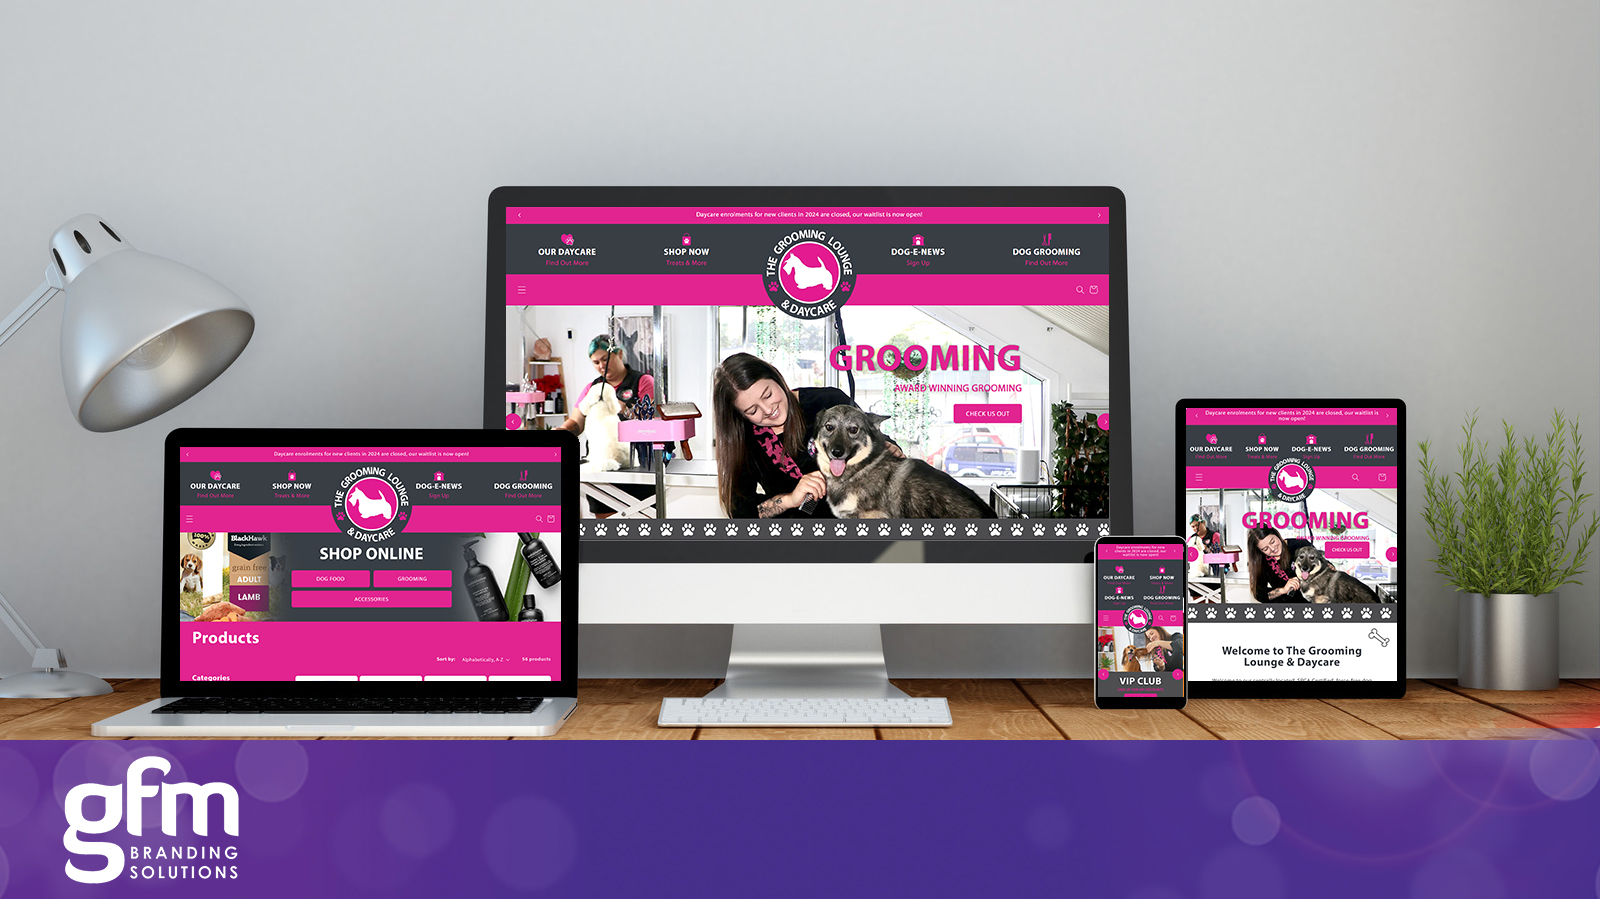 The Grooming Lounge & Daycare fully responsive website design on multiple screens